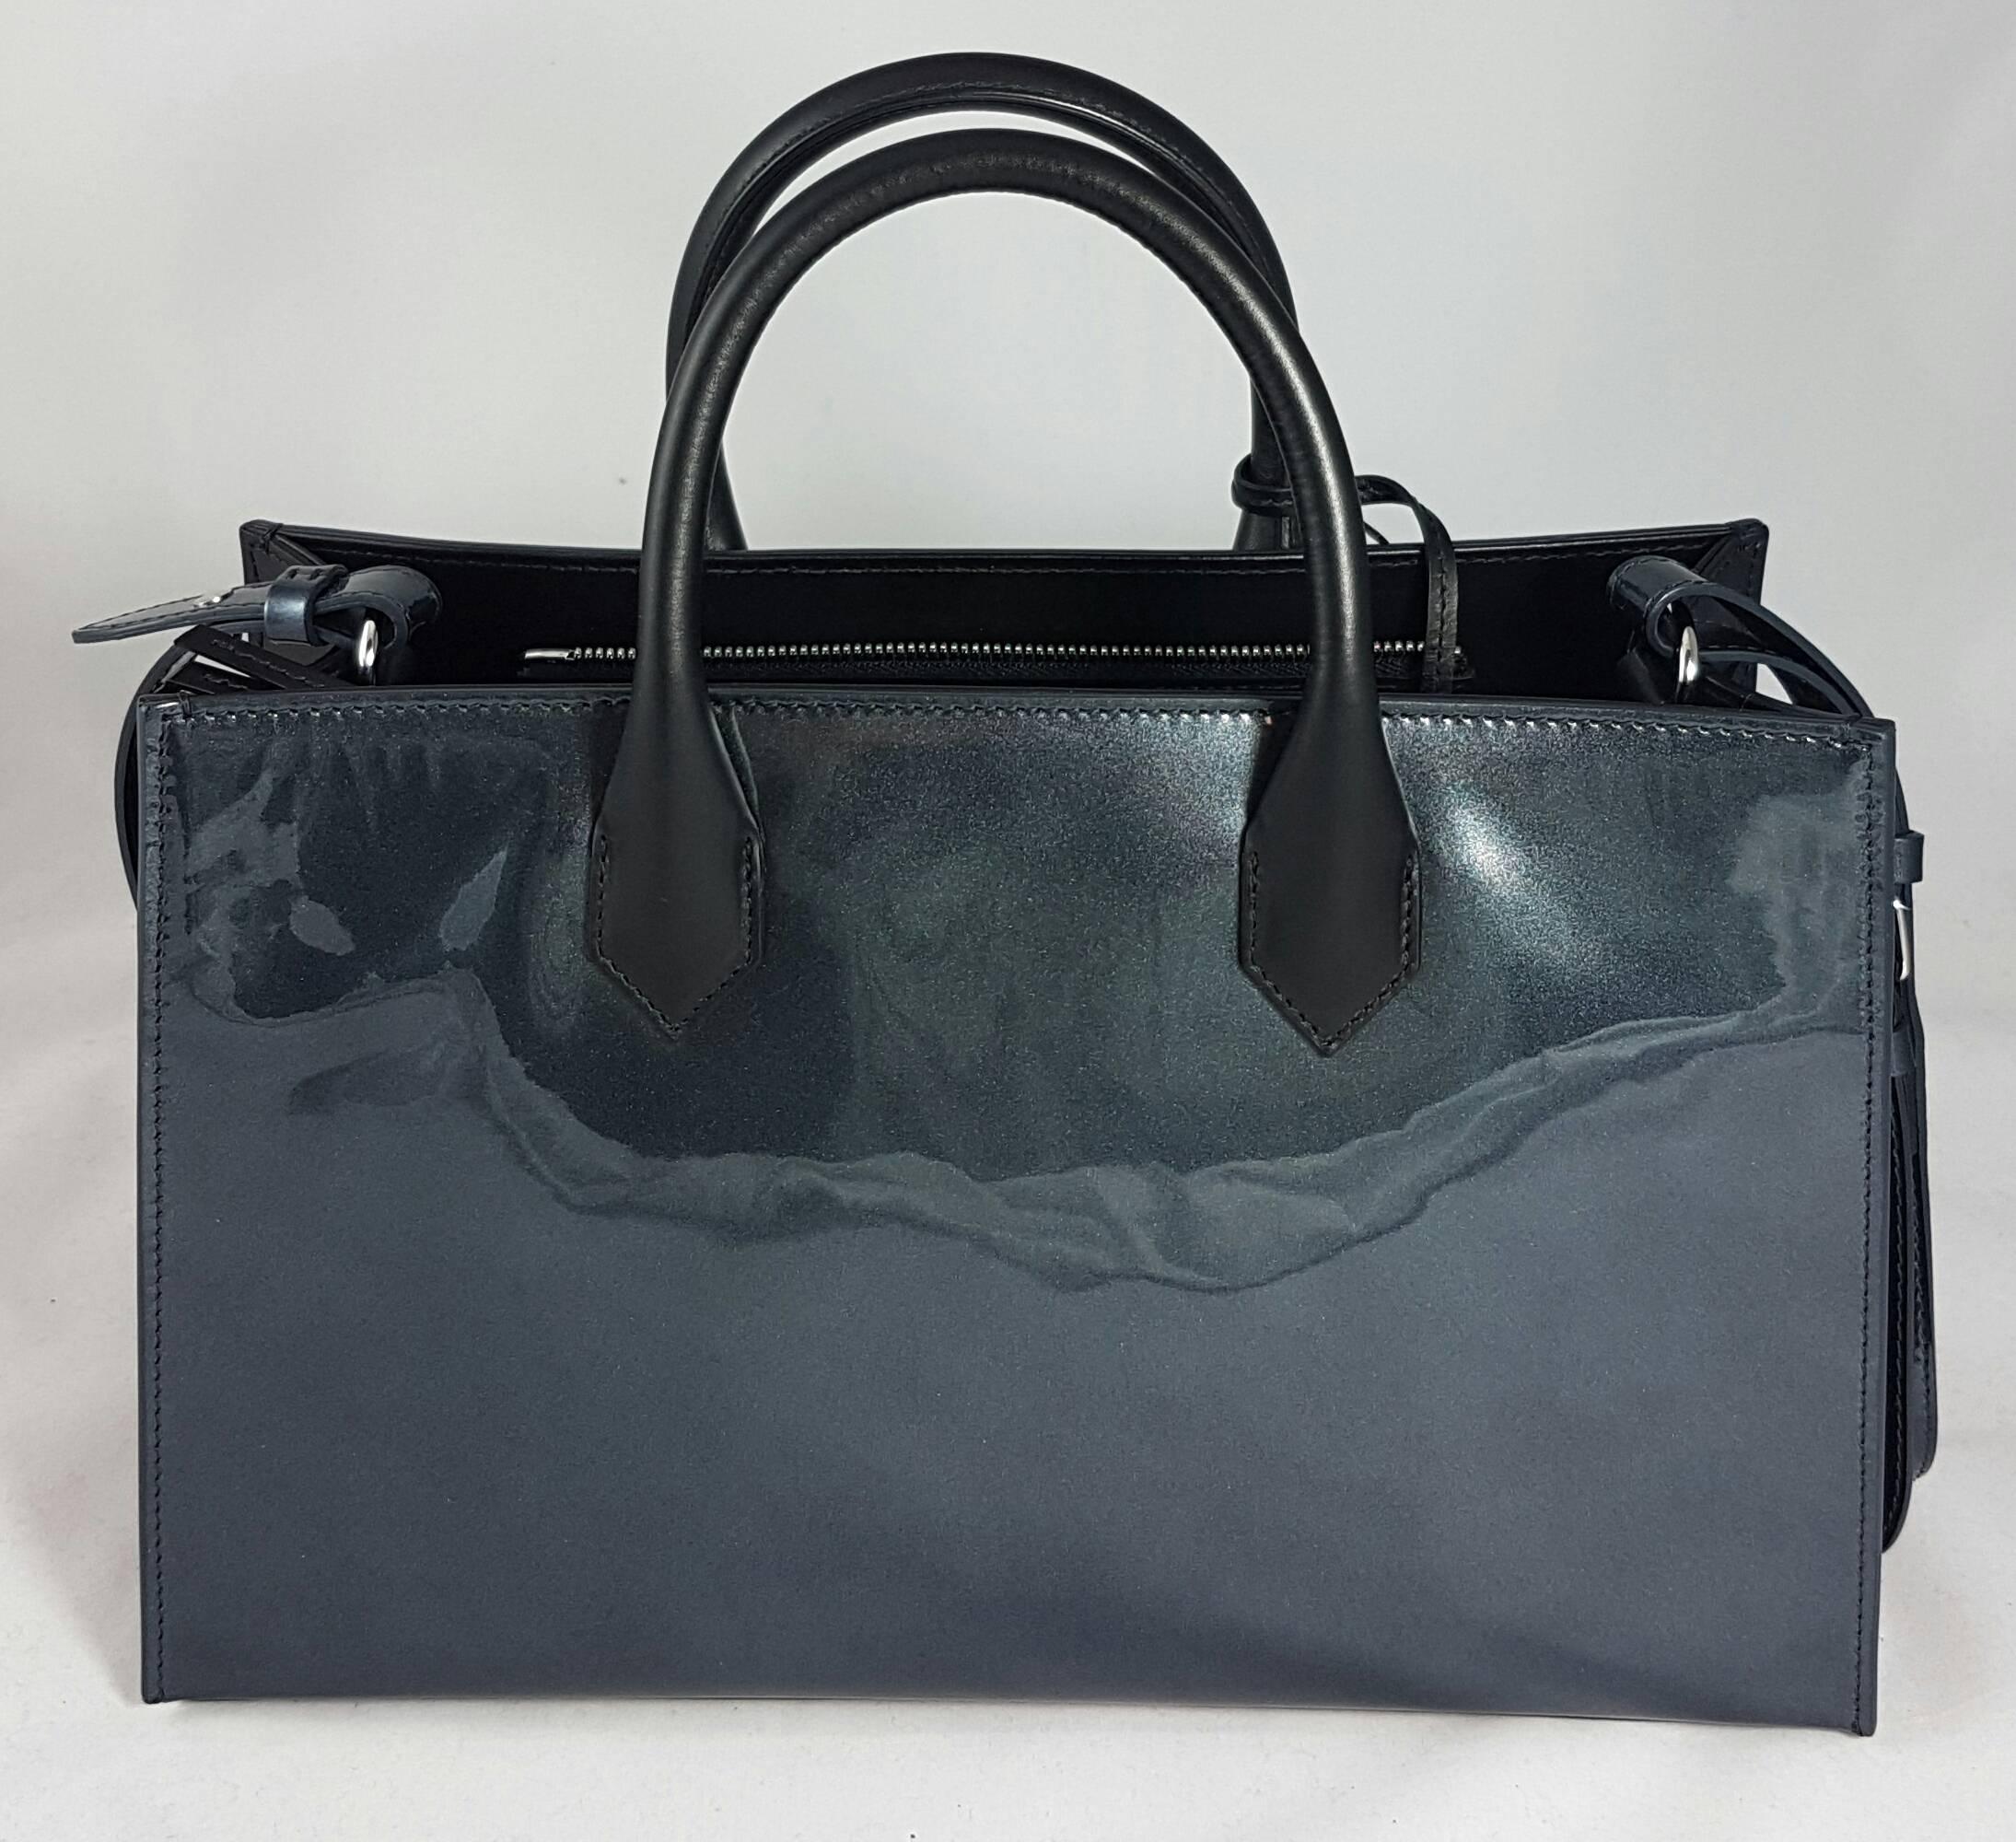 Balenciaga Padlock Work S Bag, Black In New Condition For Sale In Los Angeles, CA